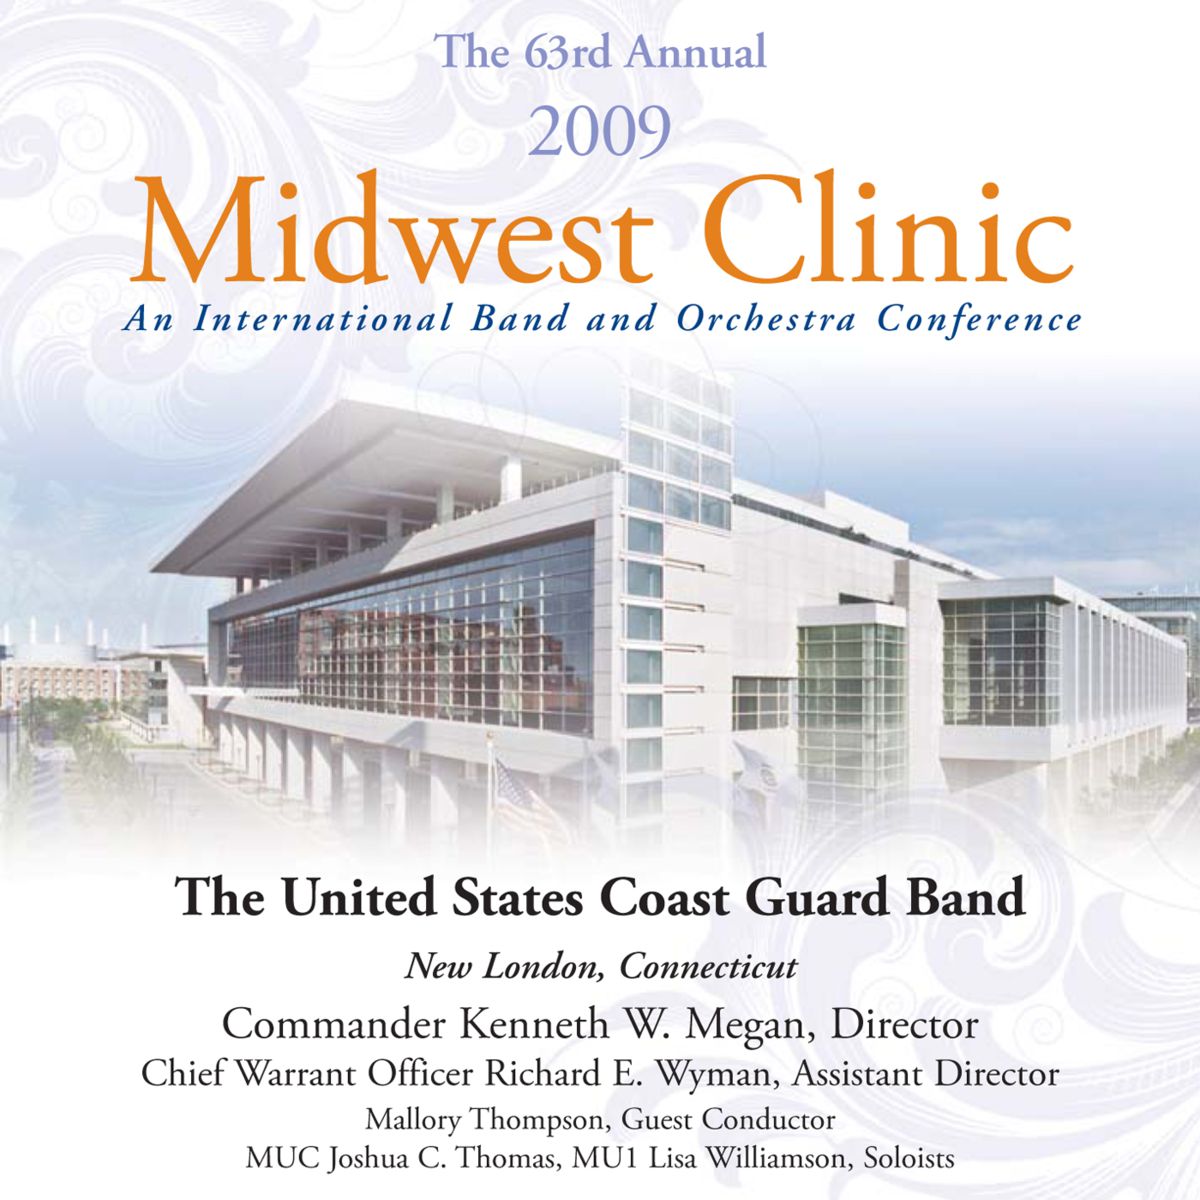 2009 Midwest Clinic: The United States Coast Guard Band - click here